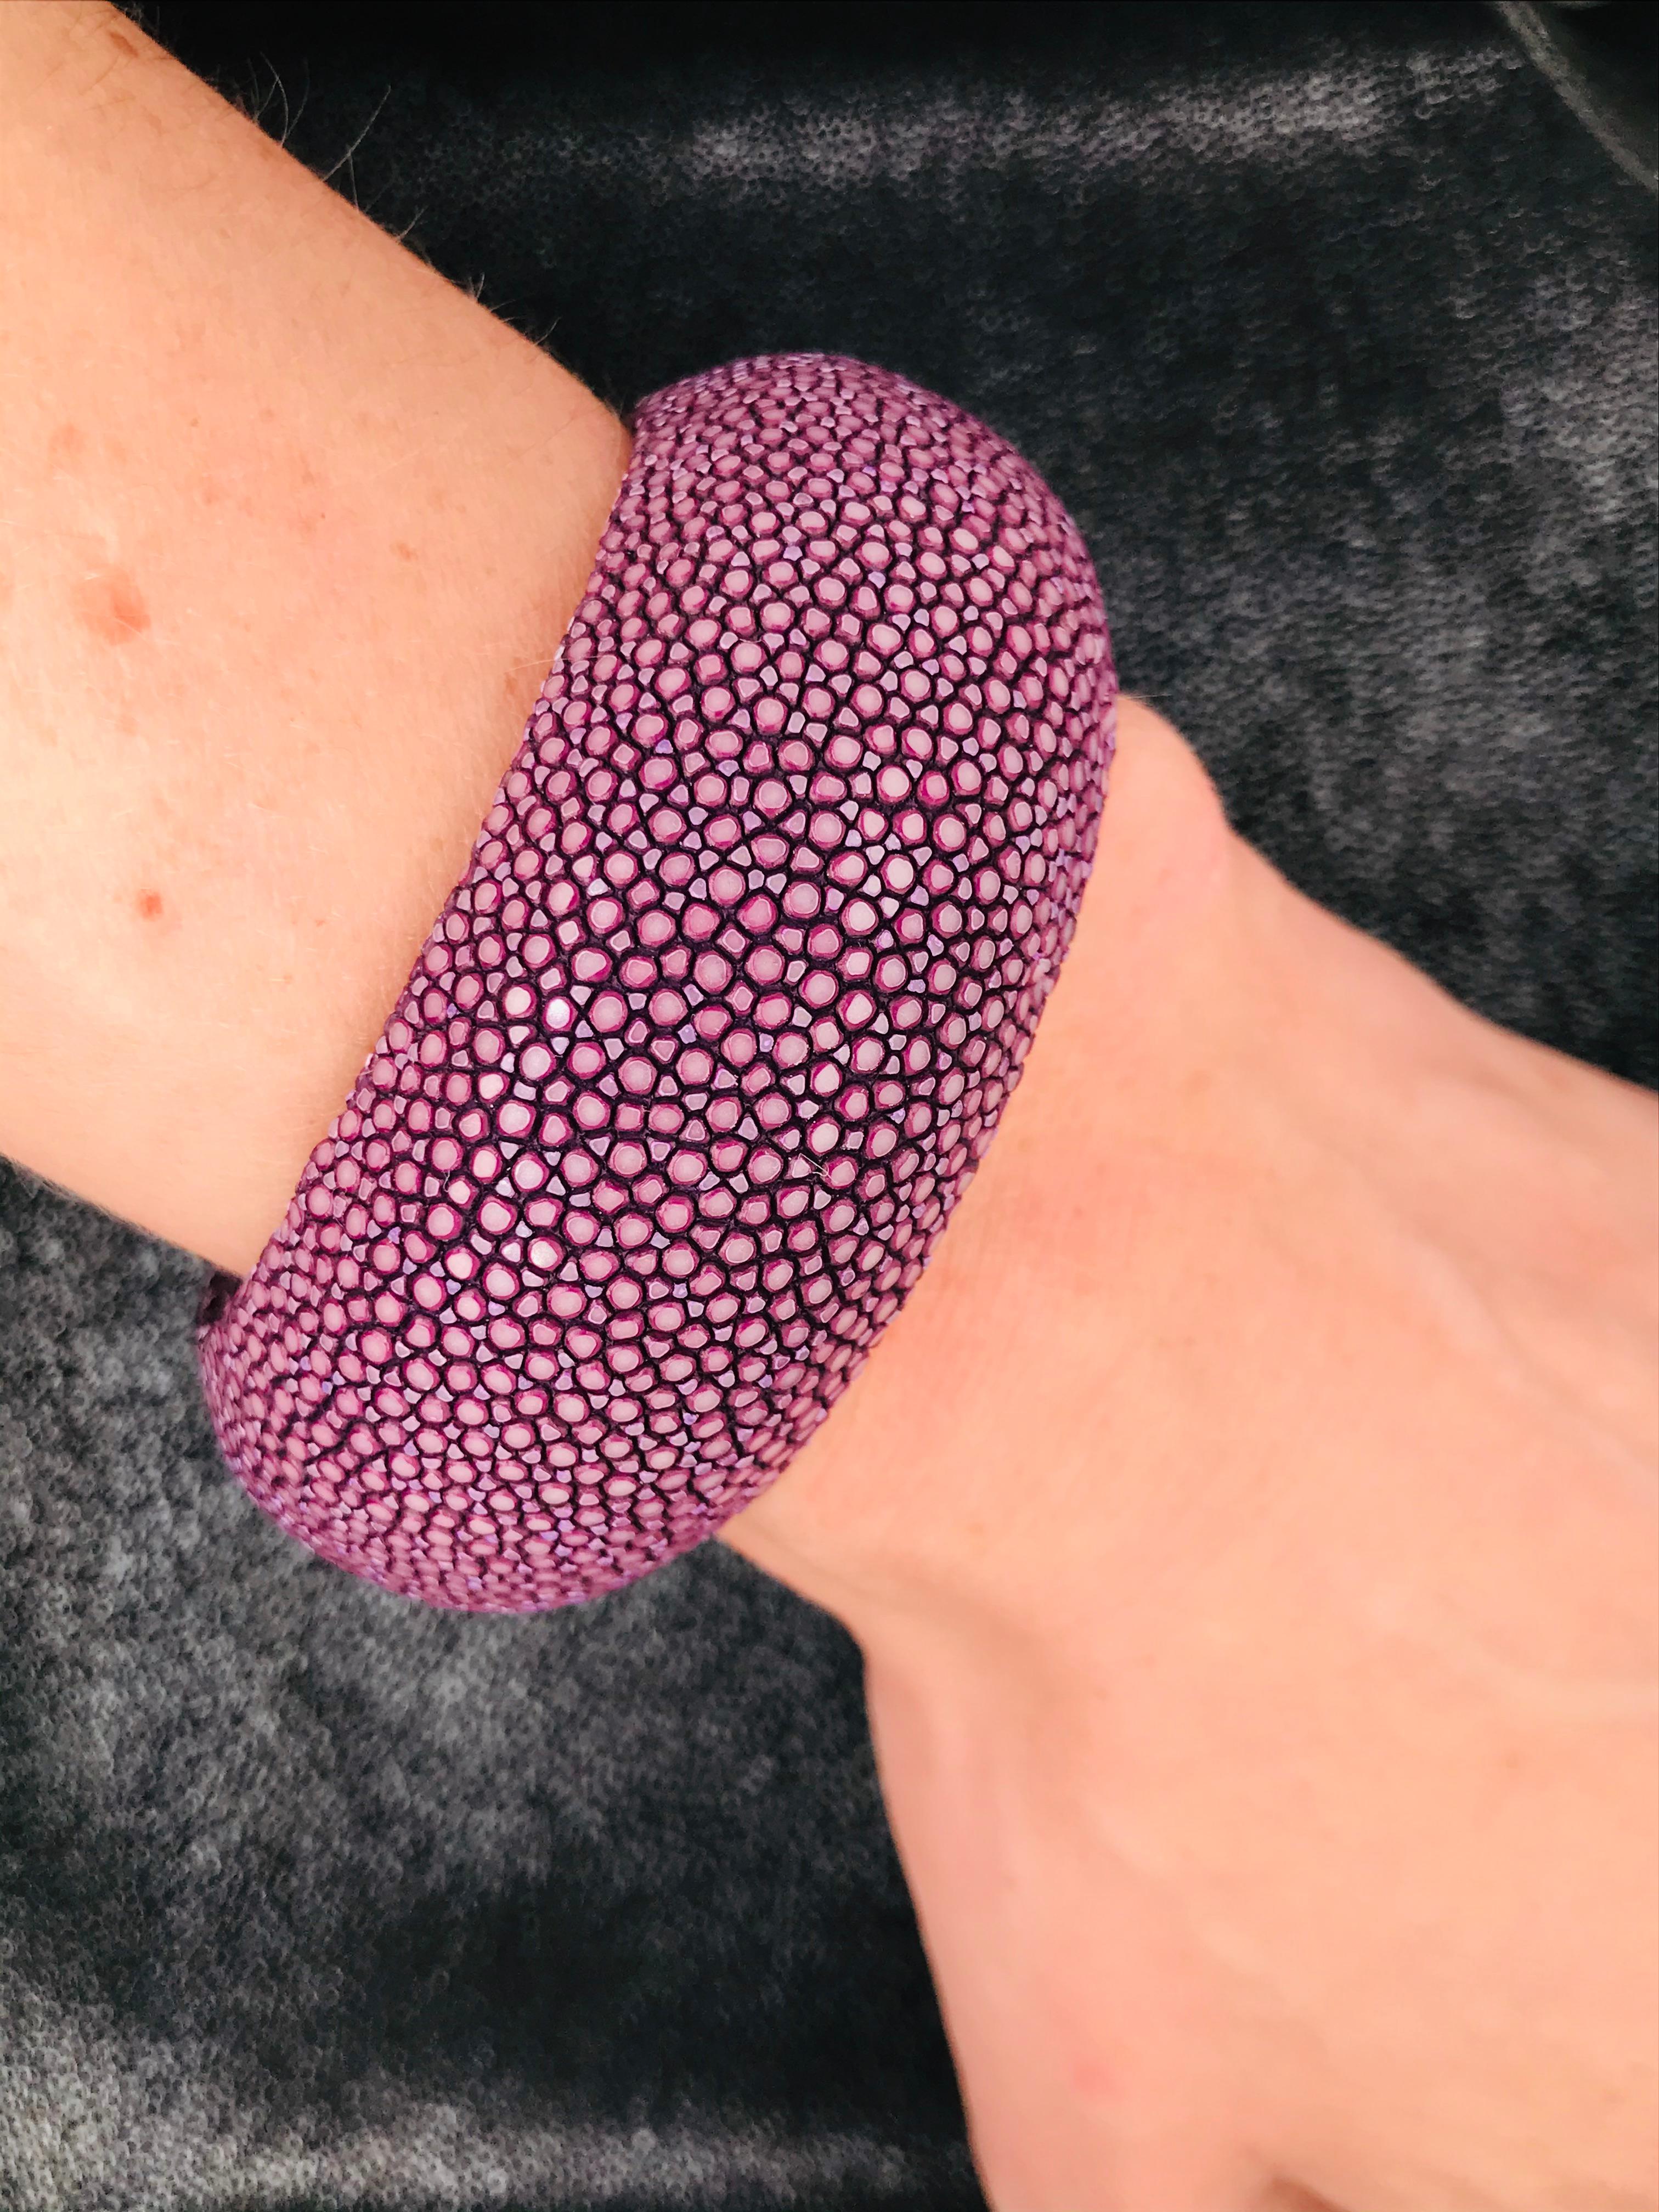 Discover this magnificent 5.3 cm wide cuff bracelet in purple stingray. This top-of-the-range accessory embodies elegance and luxury to perfection, and will add a touch of sparkle and sophistication to your most refined outfits.

Purple shagreen,